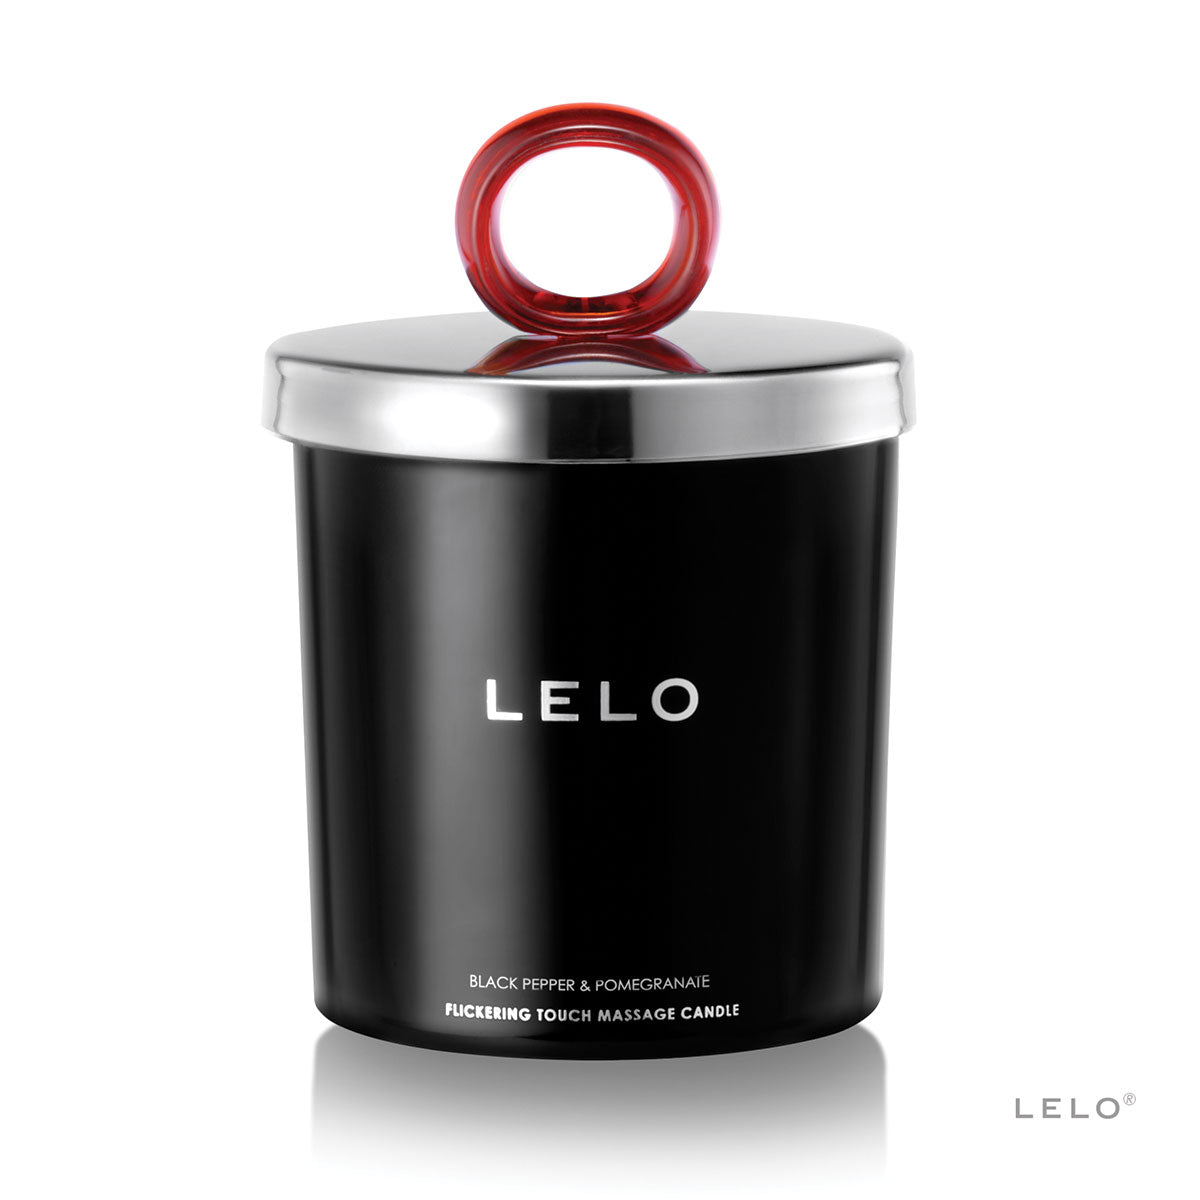 LELO Flickering Touch Massage Candle Pepper/Pomegranate